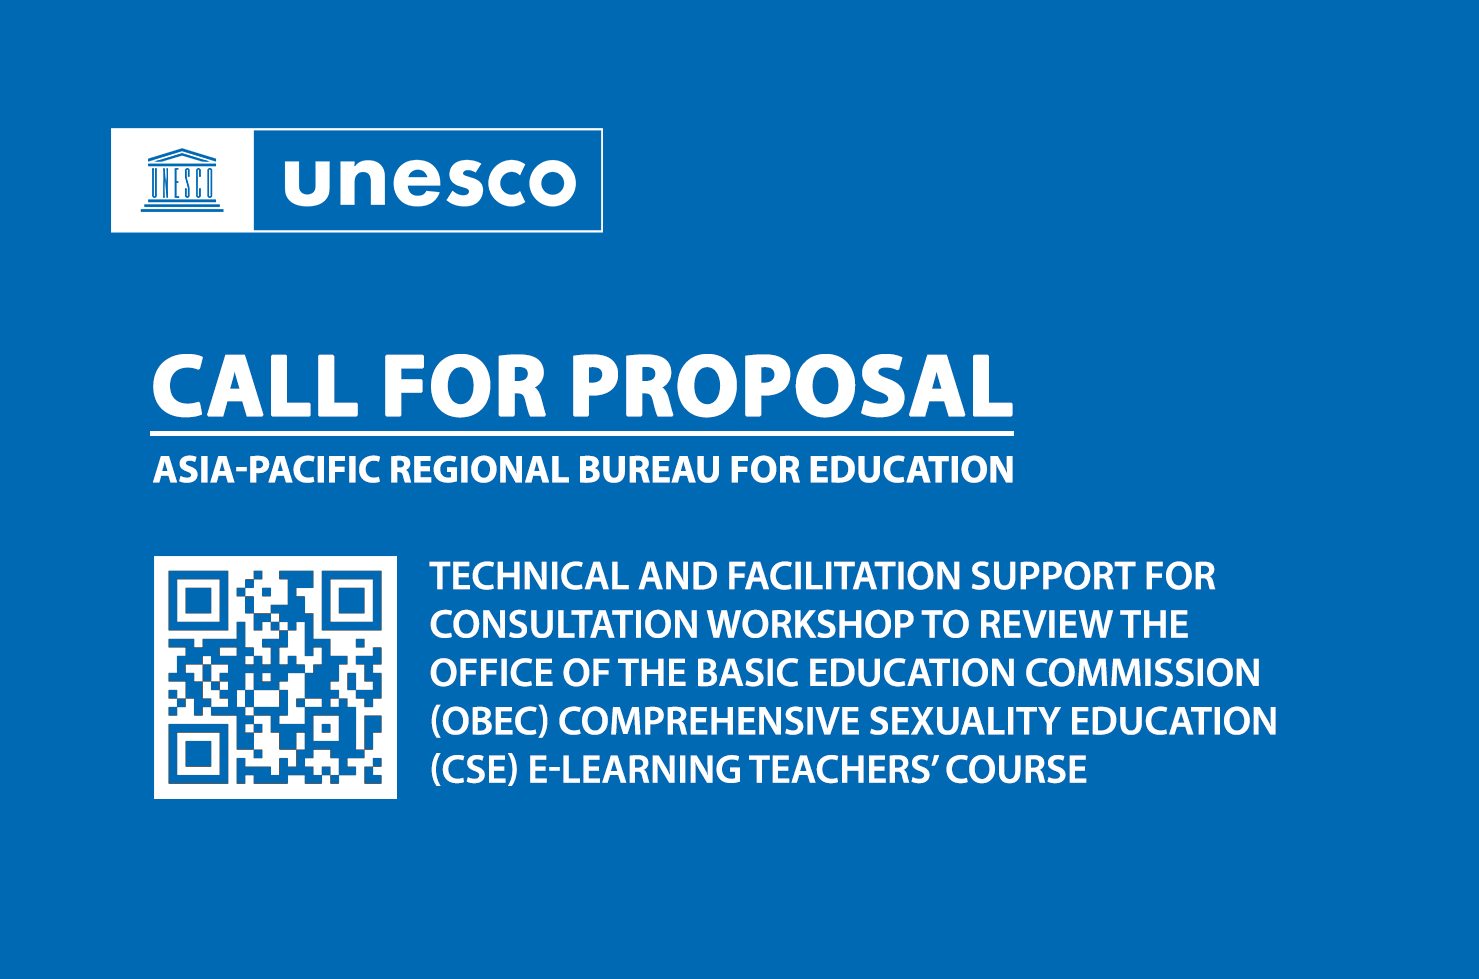 Call for Proposal: Technical and Facilitation Support for Consultation Workshop to review the Office of the Basic Education Commission (OBEC) comprehensive sexuality education (CSE) e-learning teachers’ course